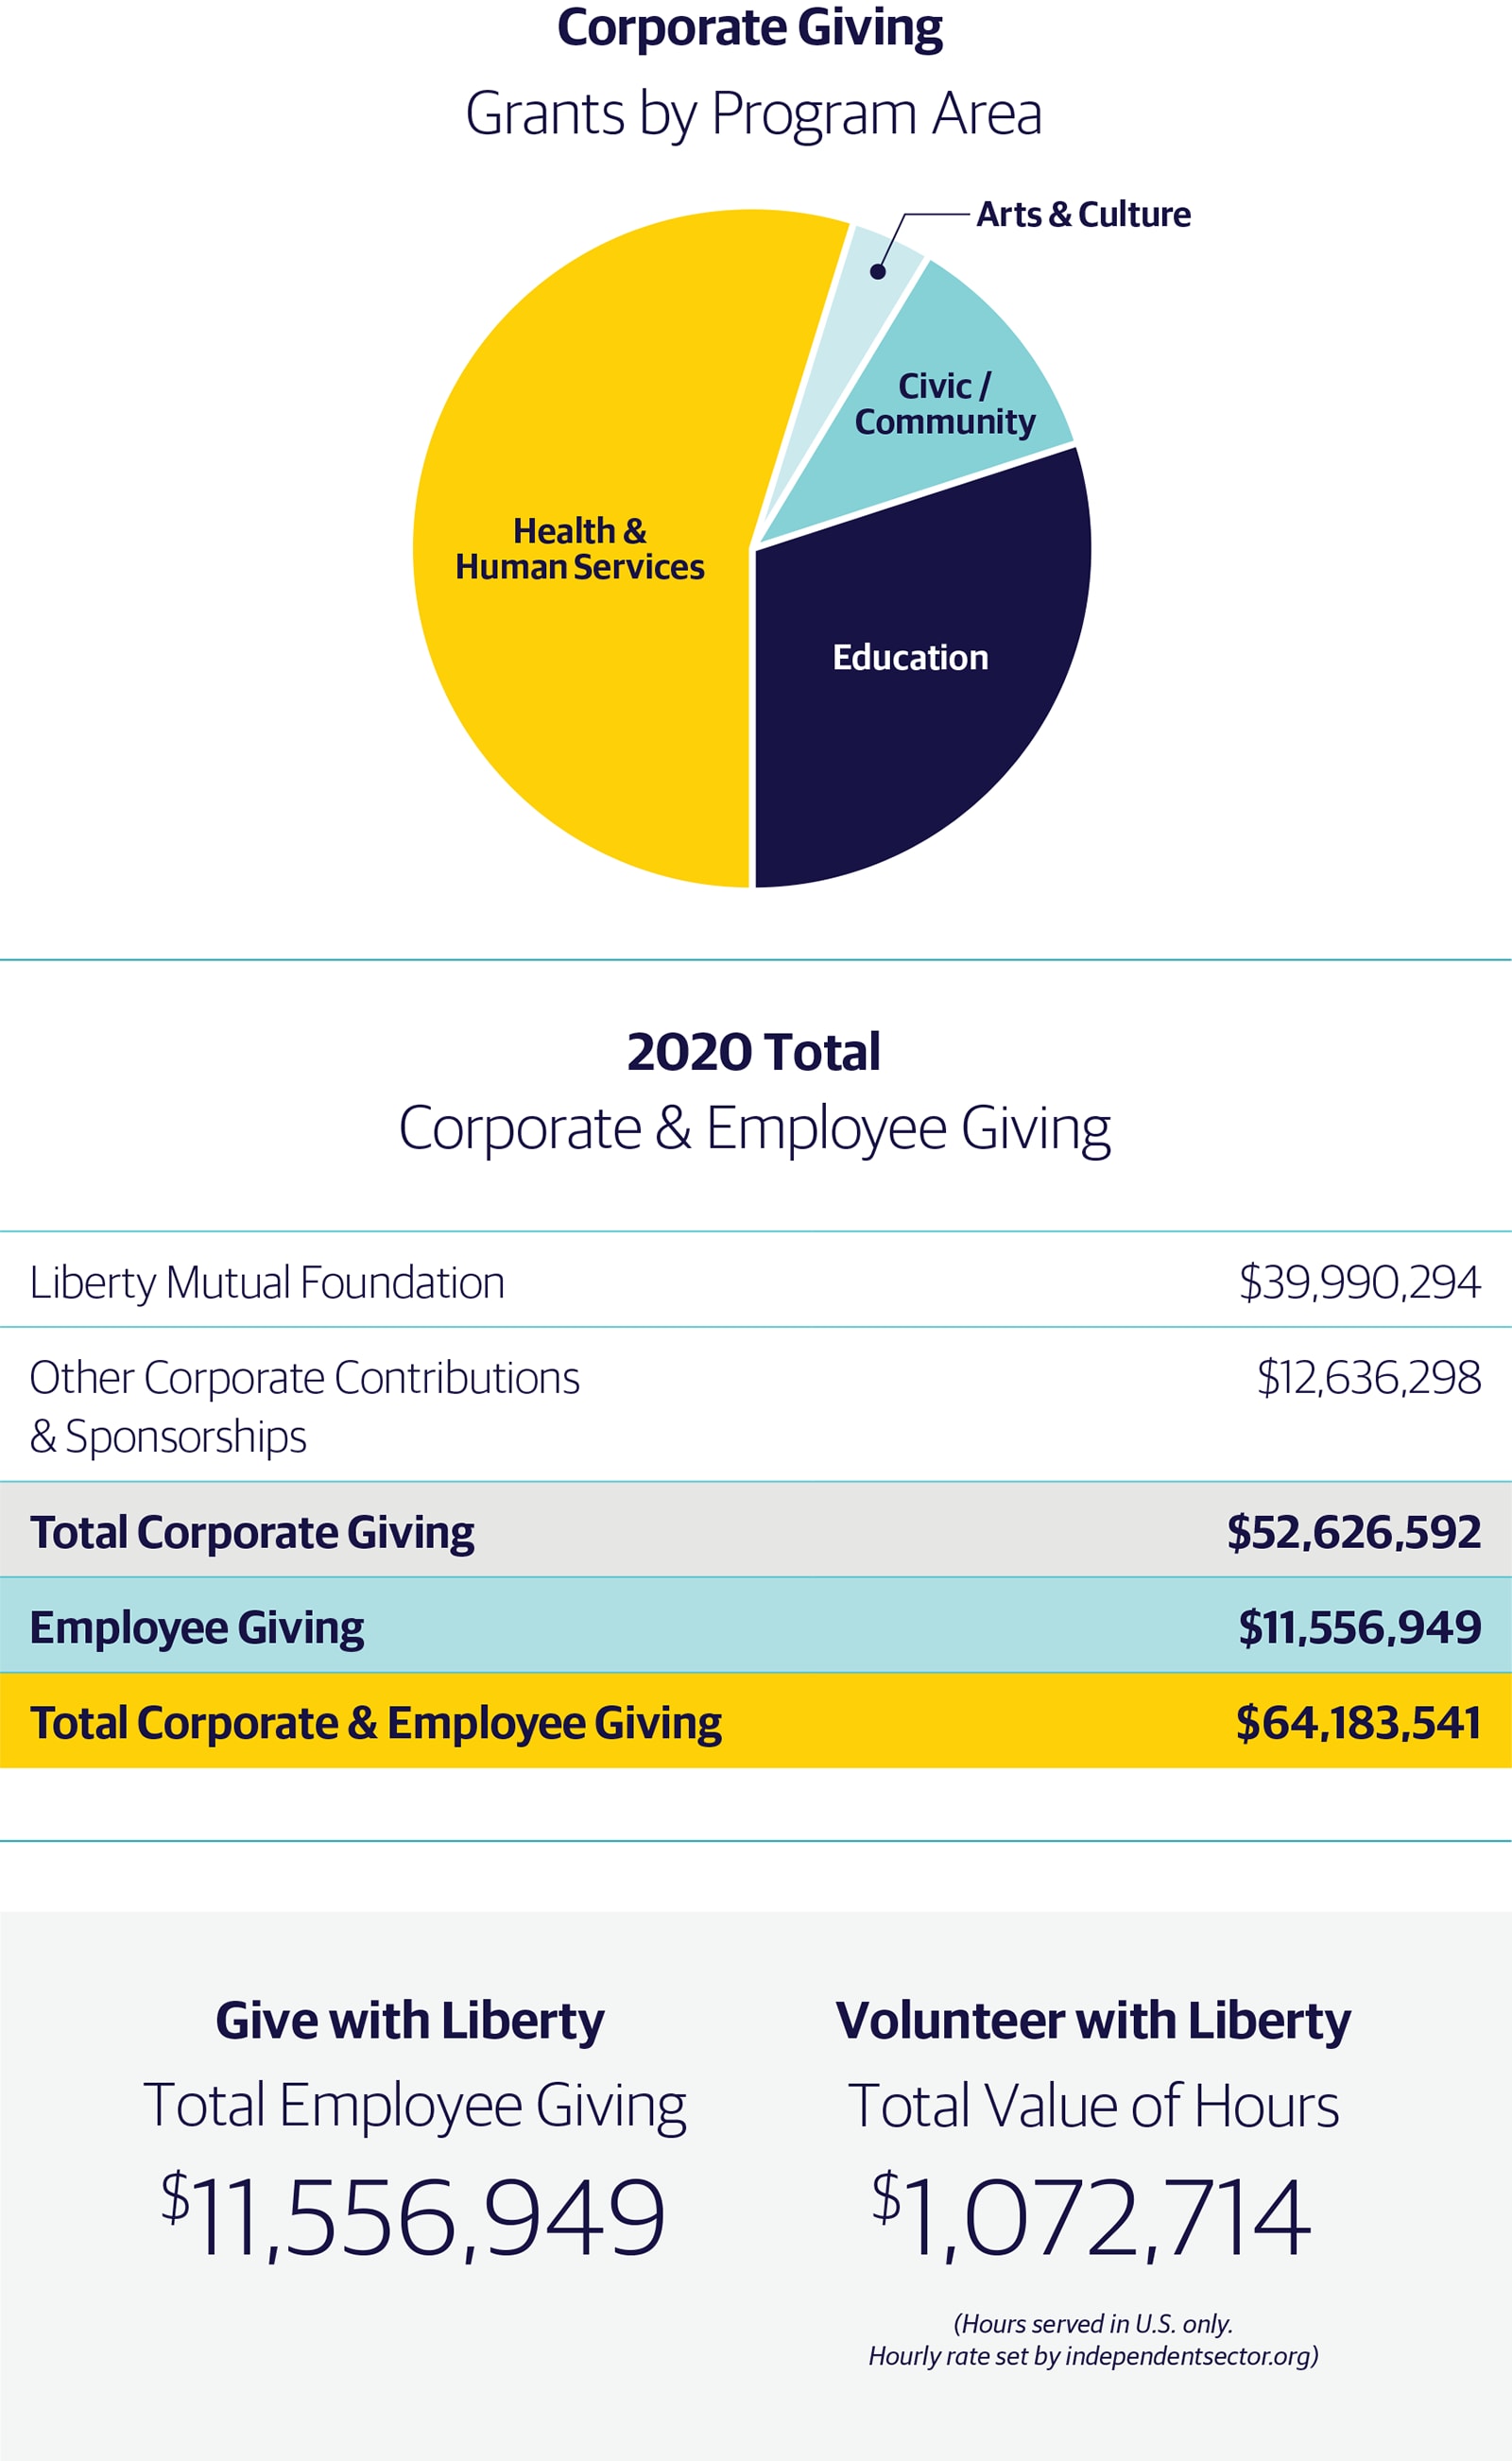 2020 Corporate Giving pie charts and infographic